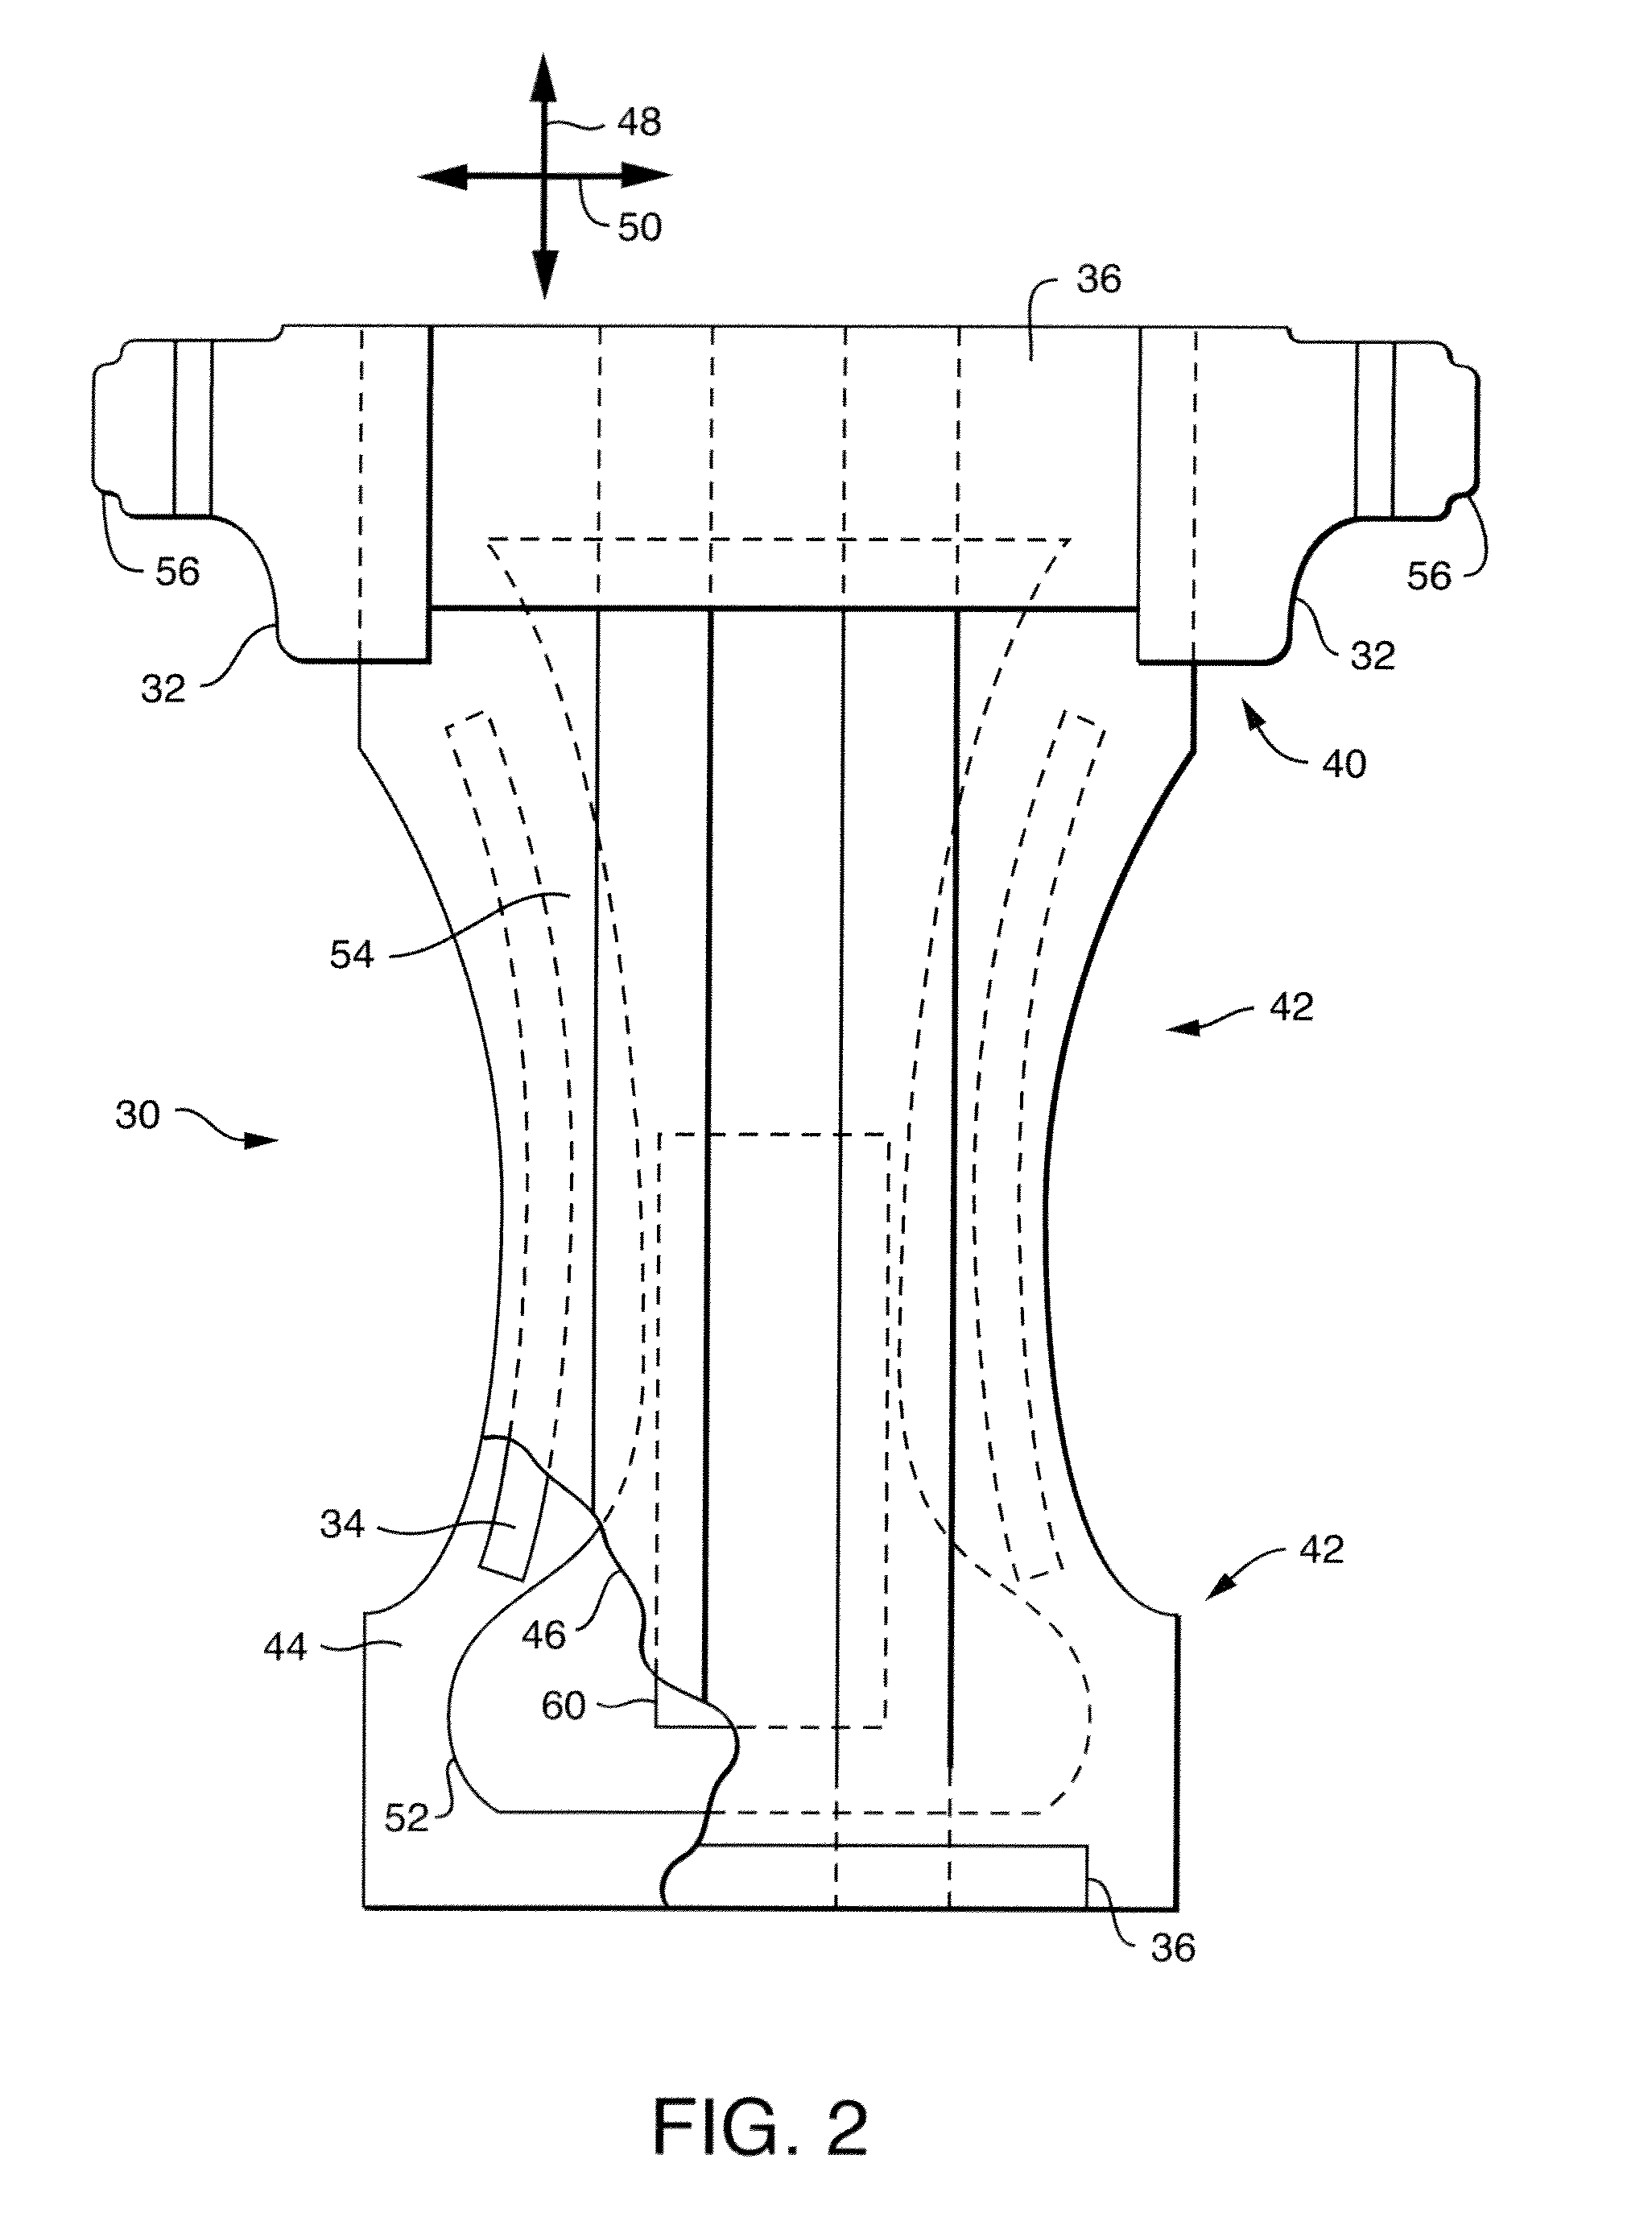 Method and Apparatus for Manufacturing an Absorbent Article with Crosslinked Elastic Components